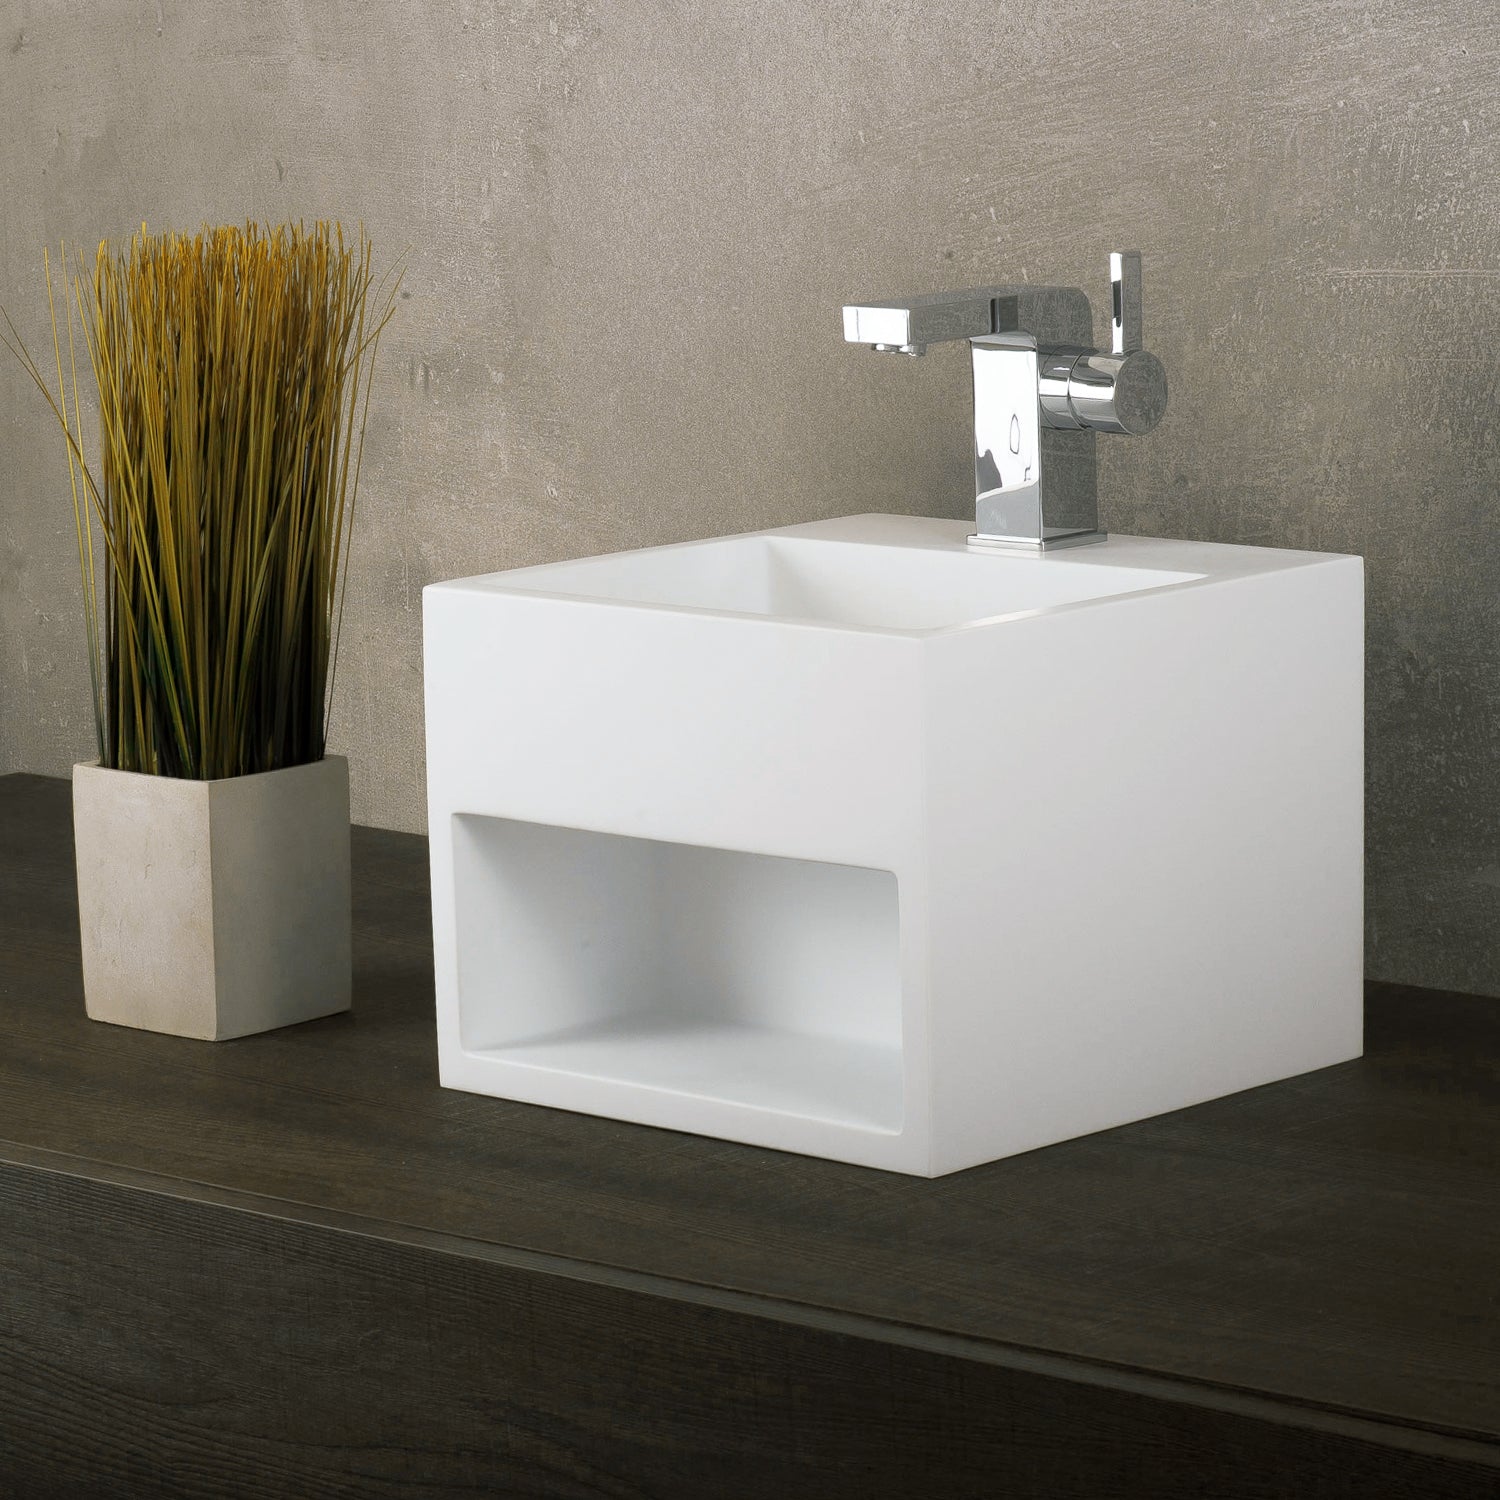 DAX Solid Surface Square Single Bowl Bathroom Sink Cabinet, White Matte Finish,  12-4/5 x 12-4/5 x 9-7/8 Inches (DAX-AB-1360)